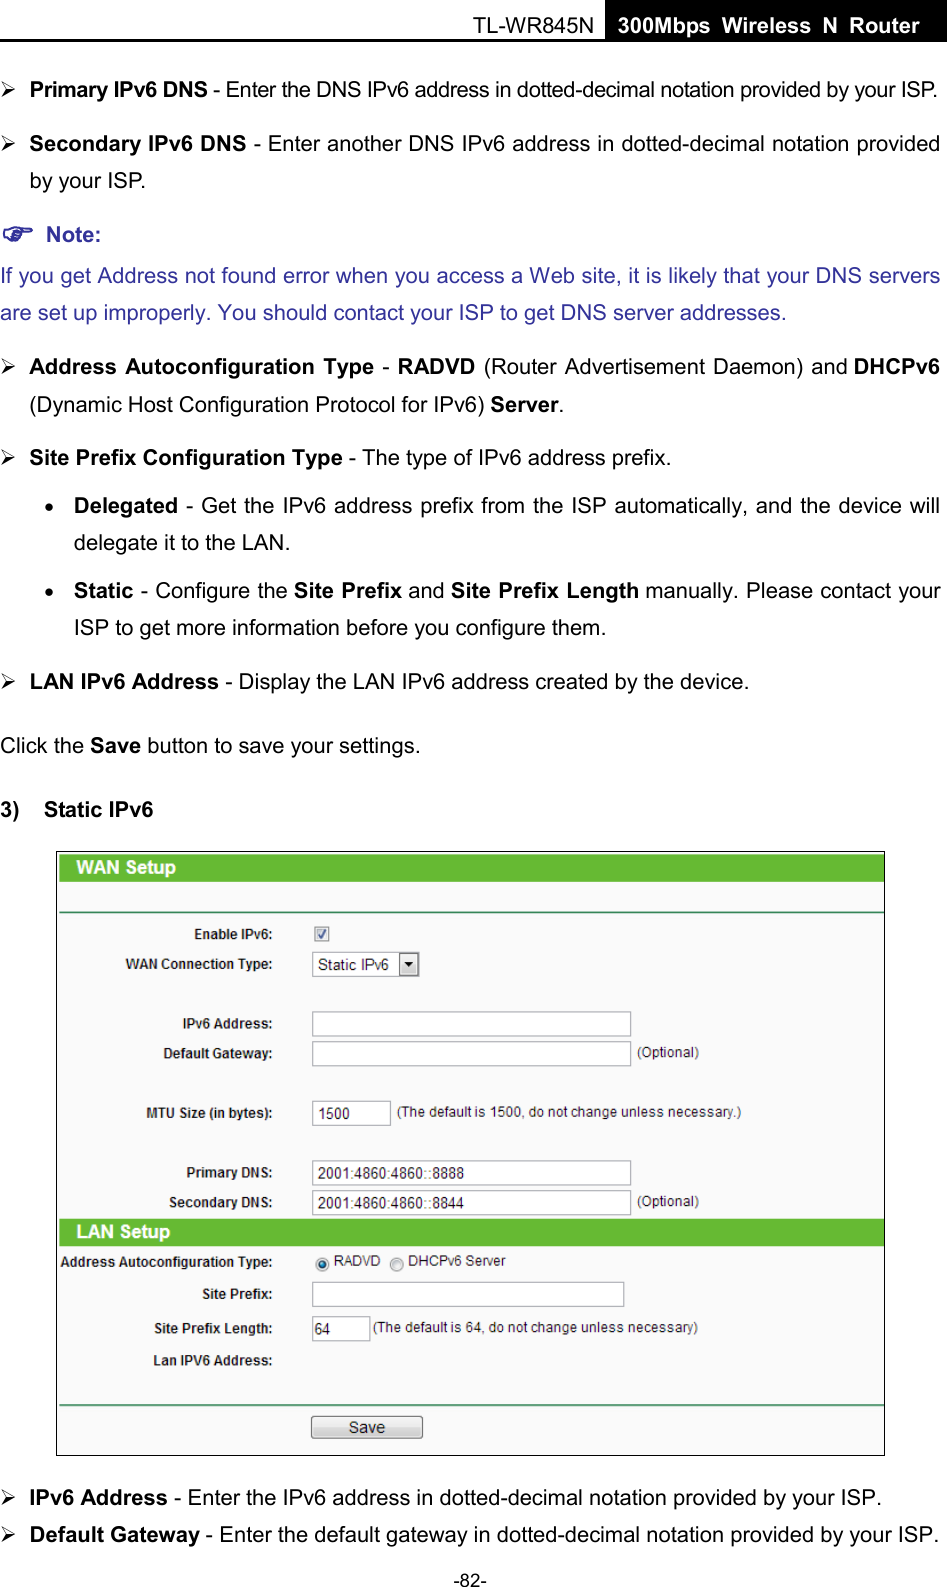  TL-WR845N  300Mbps Wireless N Router     Primary IPv6 DNS - Enter the DNS IPv6 address in dotted-decimal notation provided by your ISP.  Secondary IPv6 DNS - Enter another DNS IPv6 address in dotted-decimal notation provided by your ISP.  Note: If you get Address not found error when you access a Web site, it is likely that your DNS servers are set up improperly. You should contact your ISP to get DNS server addresses.  Address Autoconfiguration Type - RADVD (Router Advertisement Daemon) and DHCPv6 (Dynamic Host Configuration Protocol for IPv6) Server.  Site Prefix Configuration Type - The type of IPv6 address prefix. • Delegated - Get the IPv6 address prefix from the ISP automatically, and the device will delegate it to the LAN. • Static - Configure the Site Prefix and Site Prefix Length manually. Please contact your ISP to get more information before you configure them.  LAN IPv6 Address - Display the LAN IPv6 address created by the device. Click the Save button to save your settings. 3) Static IPv6   IPv6 Address - Enter the IPv6 address in dotted-decimal notation provided by your ISP.  Default Gateway - Enter the default gateway in dotted-decimal notation provided by your ISP. -82- 